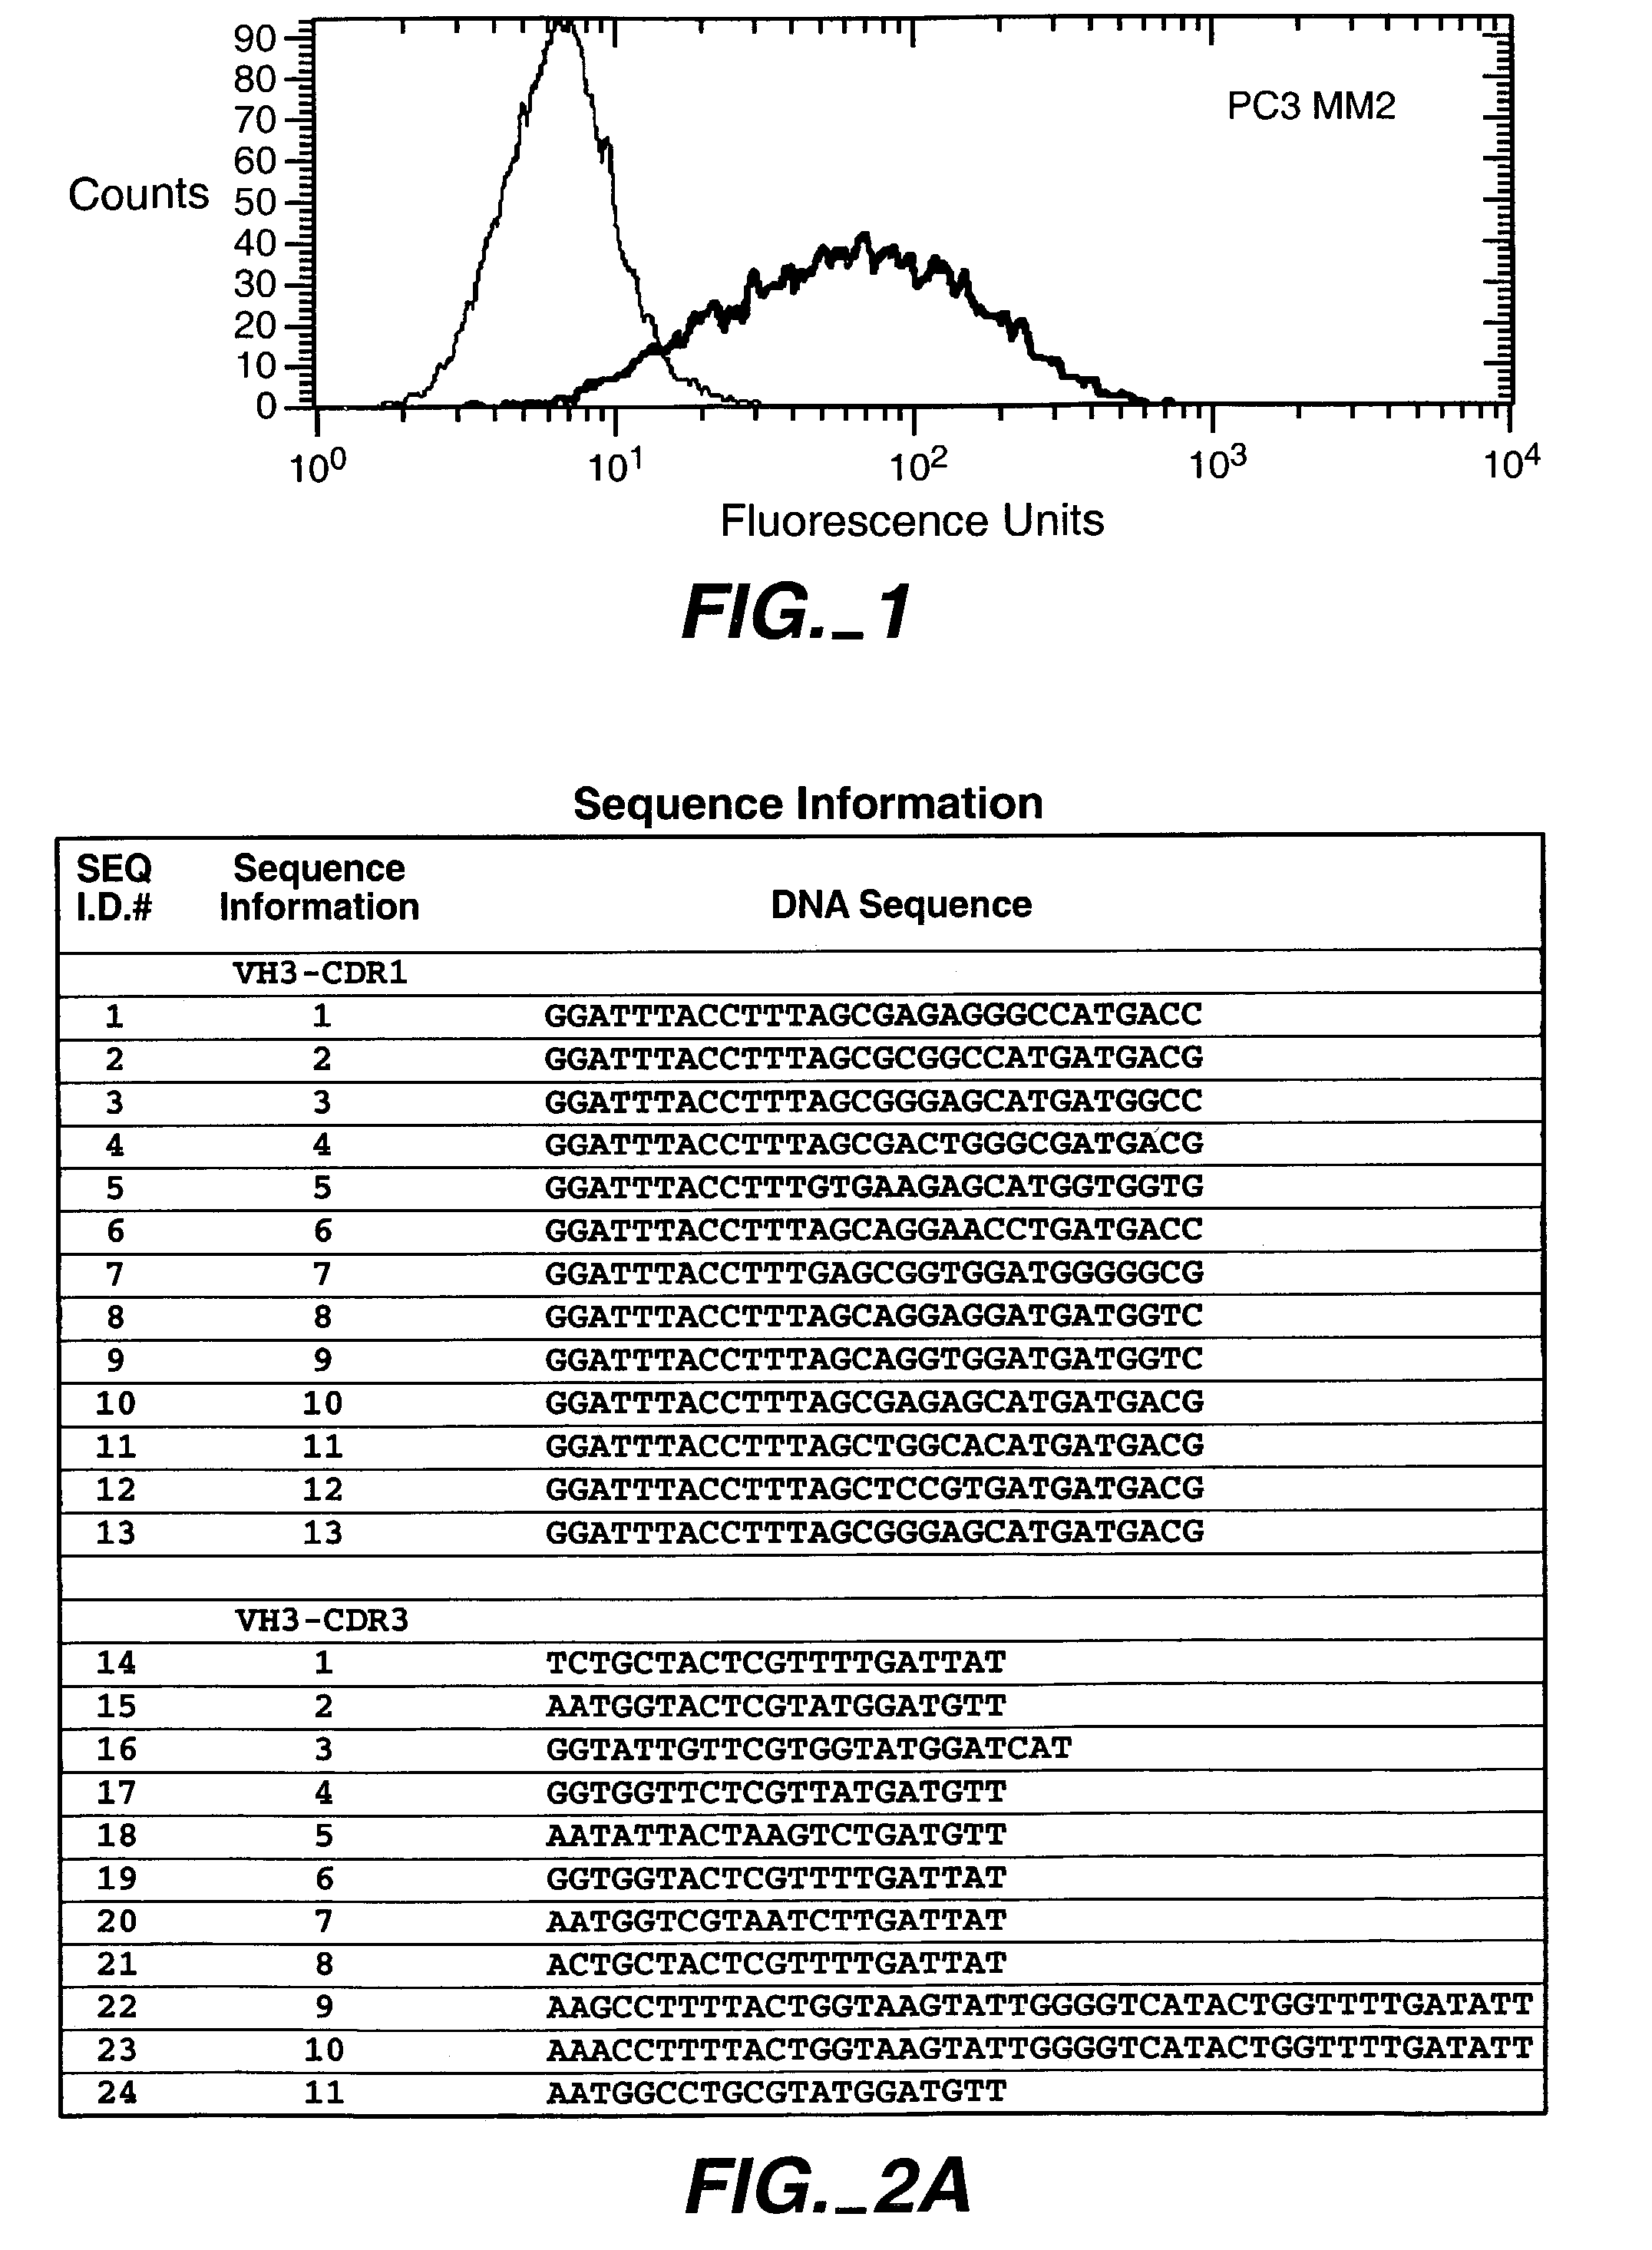 Human antibodies that have MN binding and cell adhesion-neutralizing activity